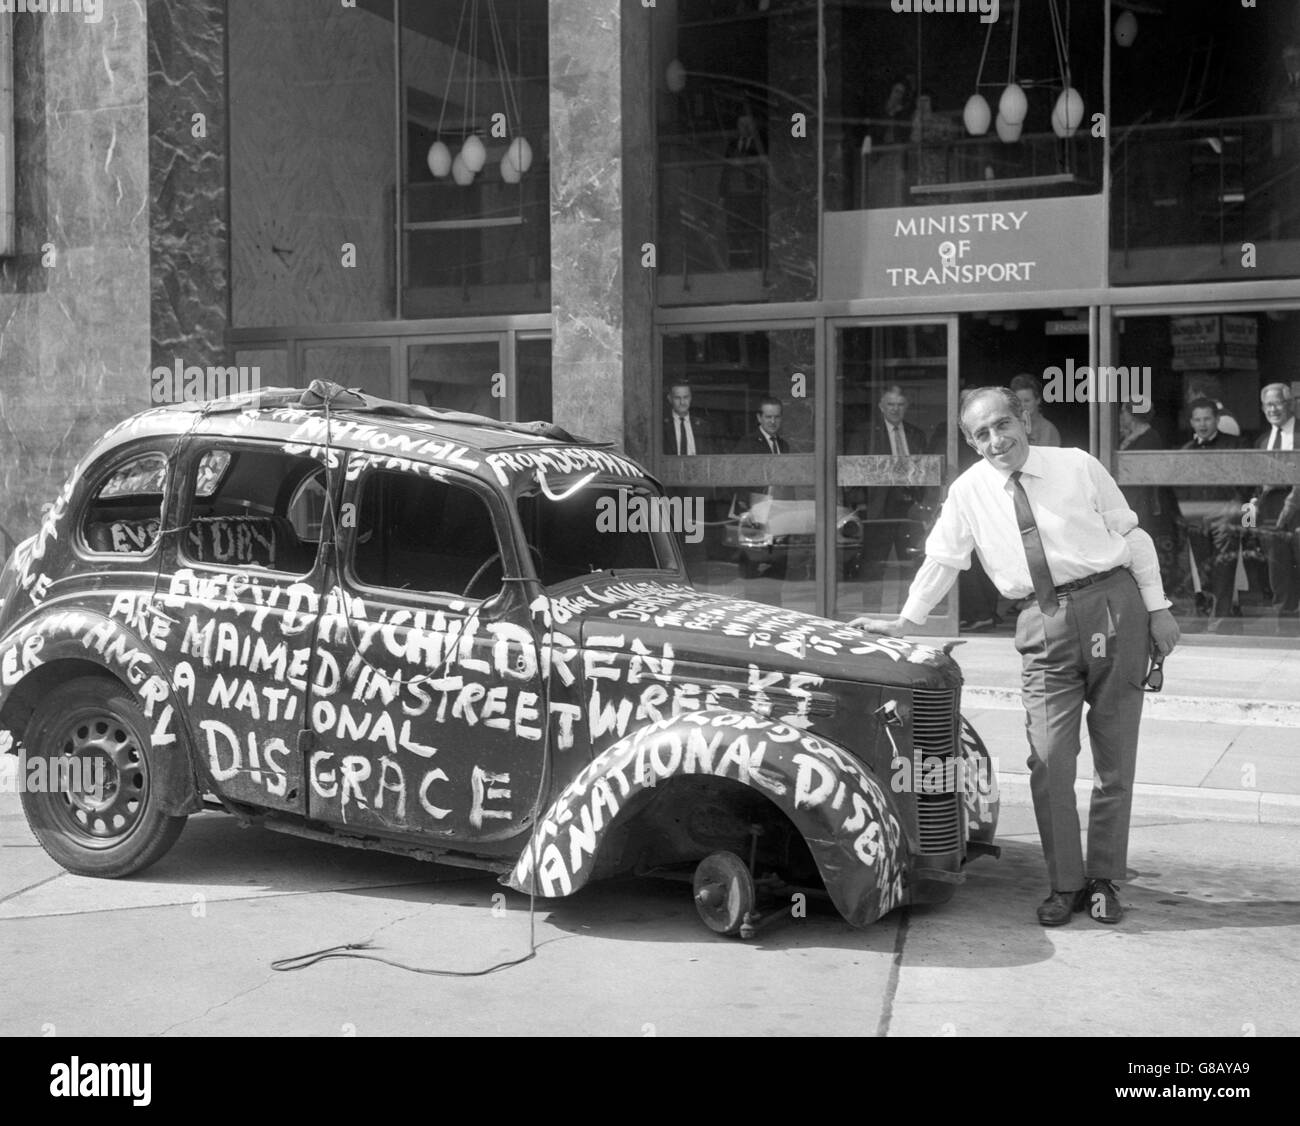 Joseph Mourat, 41, hotel proprietor of Bickley, Kent, with the derelict 1948 Austin 10 car that he brought in protest to the entrance of the Ministry of Transport in Southwark Street, London. The car had been abandoned for some time outside his hotel and, because the authorities took no action to remove it, Mourat towed the car to London. Stock Photo